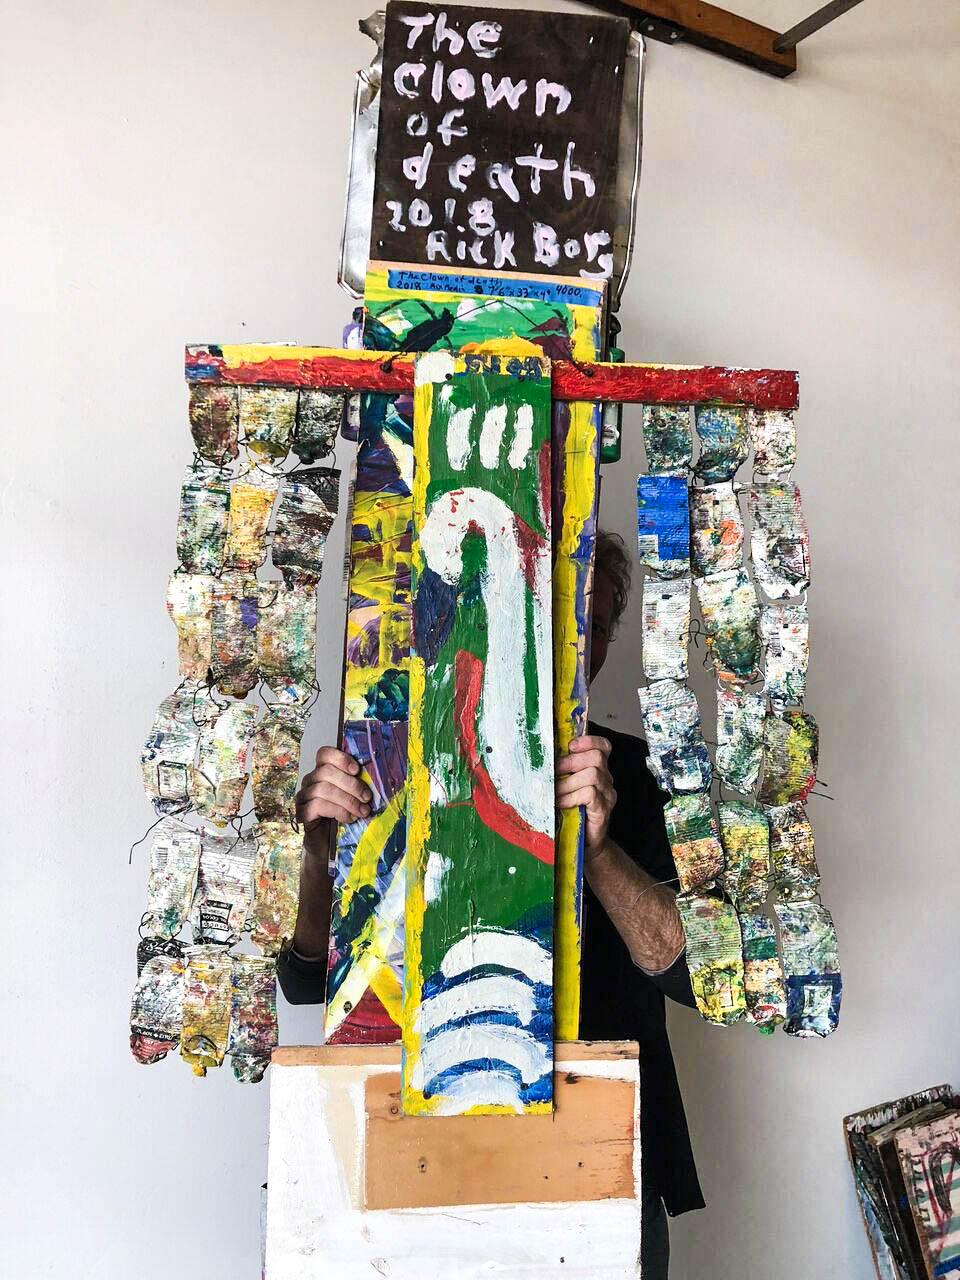 Colorful and vibrant folk art installation made from found objects.

Artist Statement	
“I love to paint. It’s very natural for me. It’s a daydream with paint or an expression of feeling or an experiment or just fun and soul exploration or prayer or